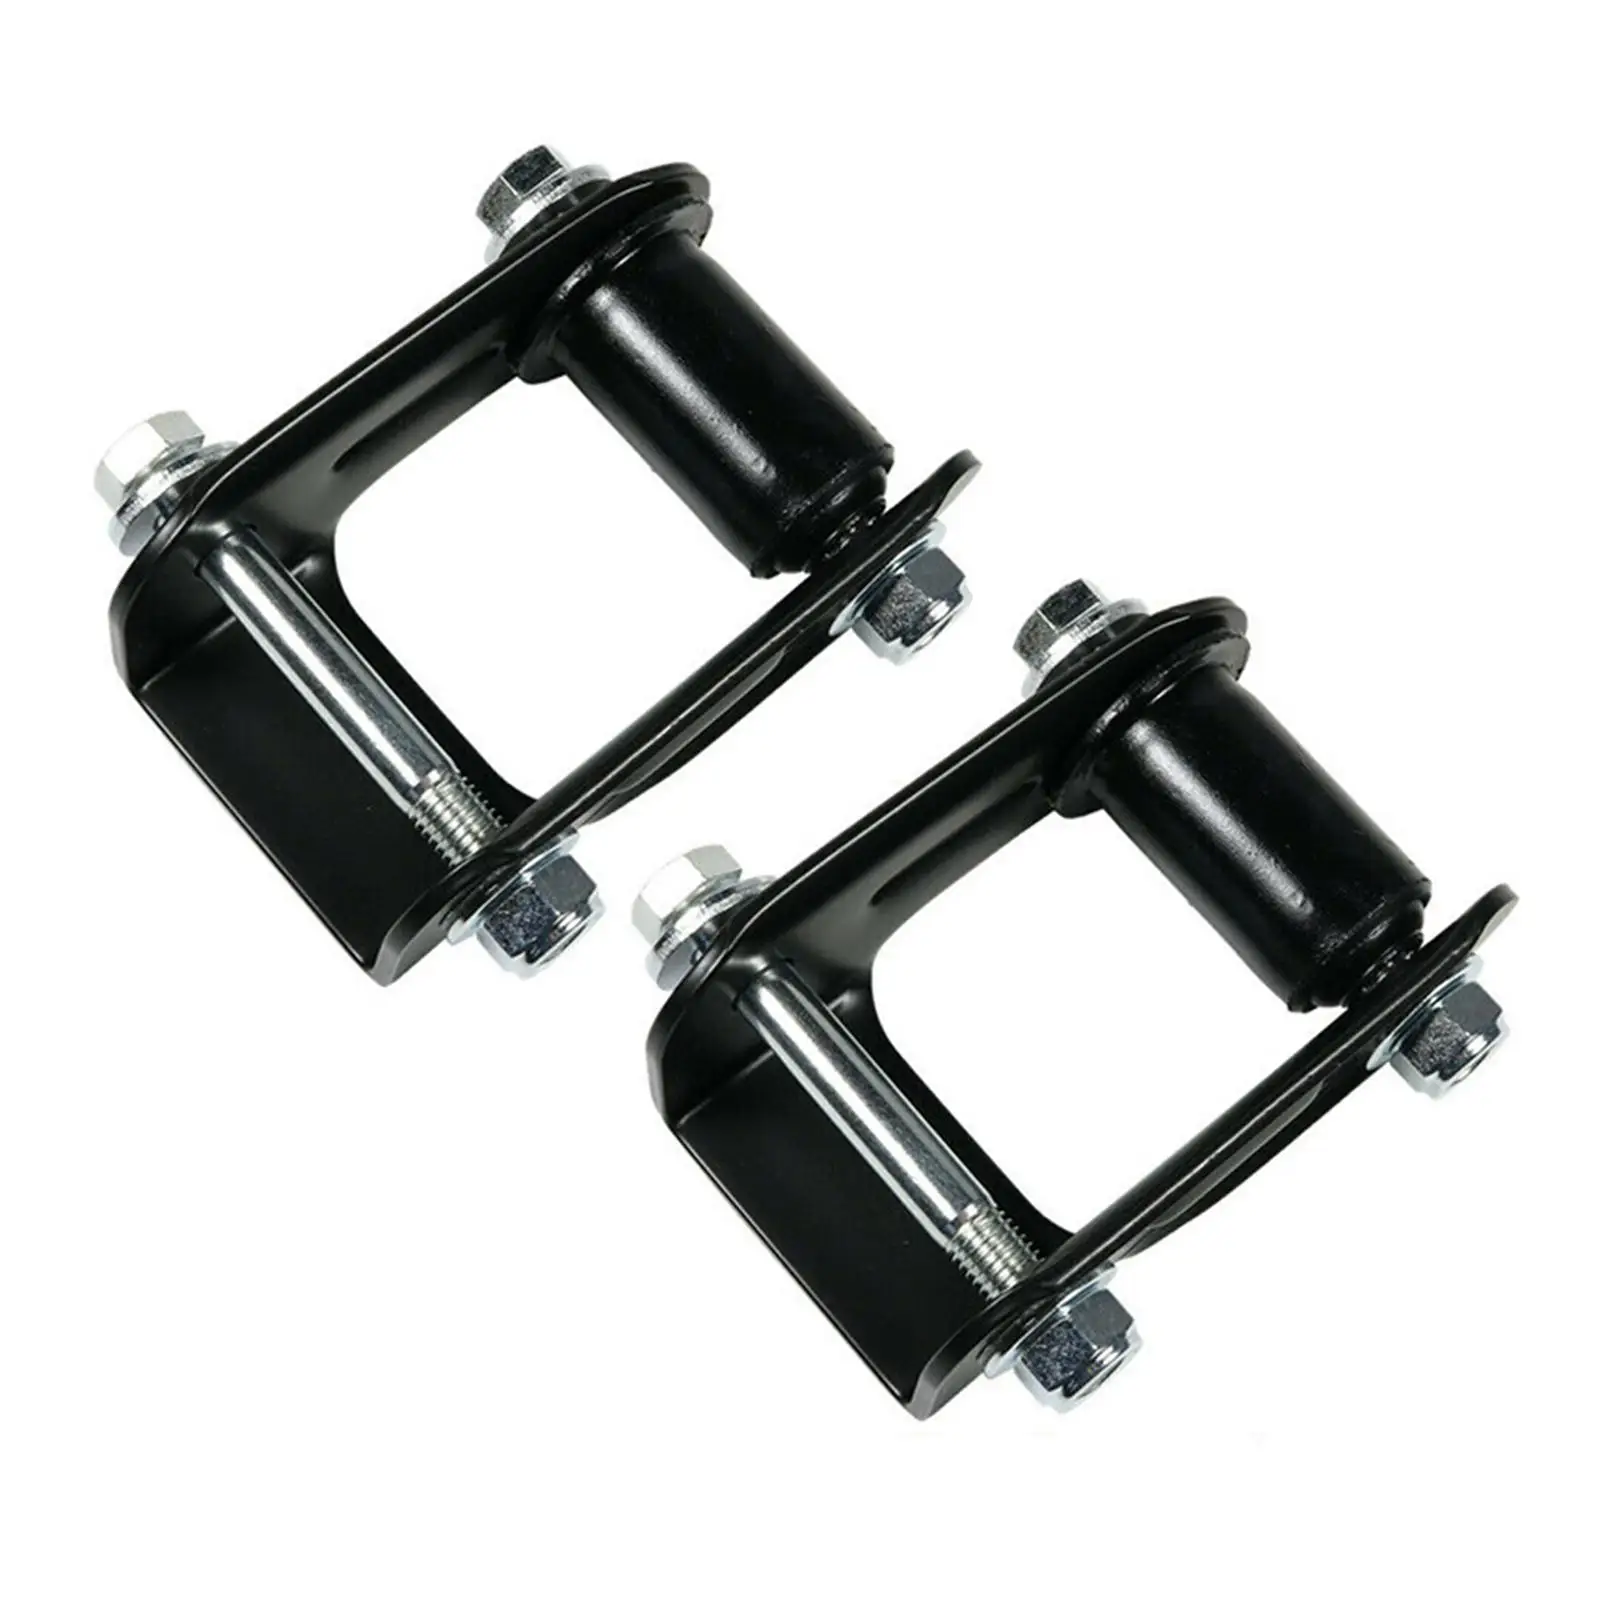 2 Pieces Leaf Spring Shackle Kit Fine Surface Processing Easily Install Wear Resistance 722-028 for Chevrolet S10 Pickup